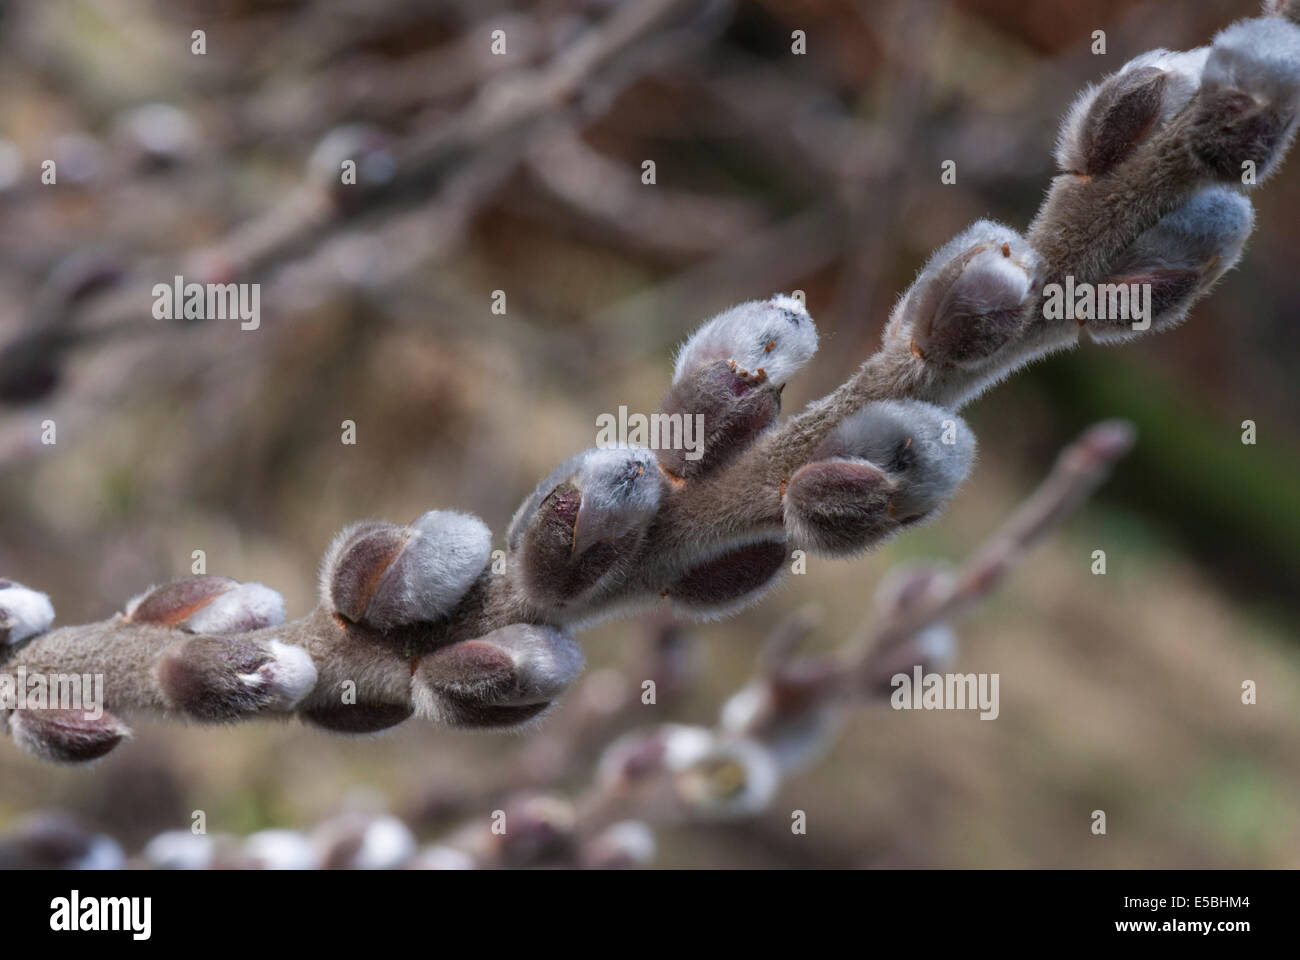 Buds of a tree, possibly a Willow, Salix Stock Photo